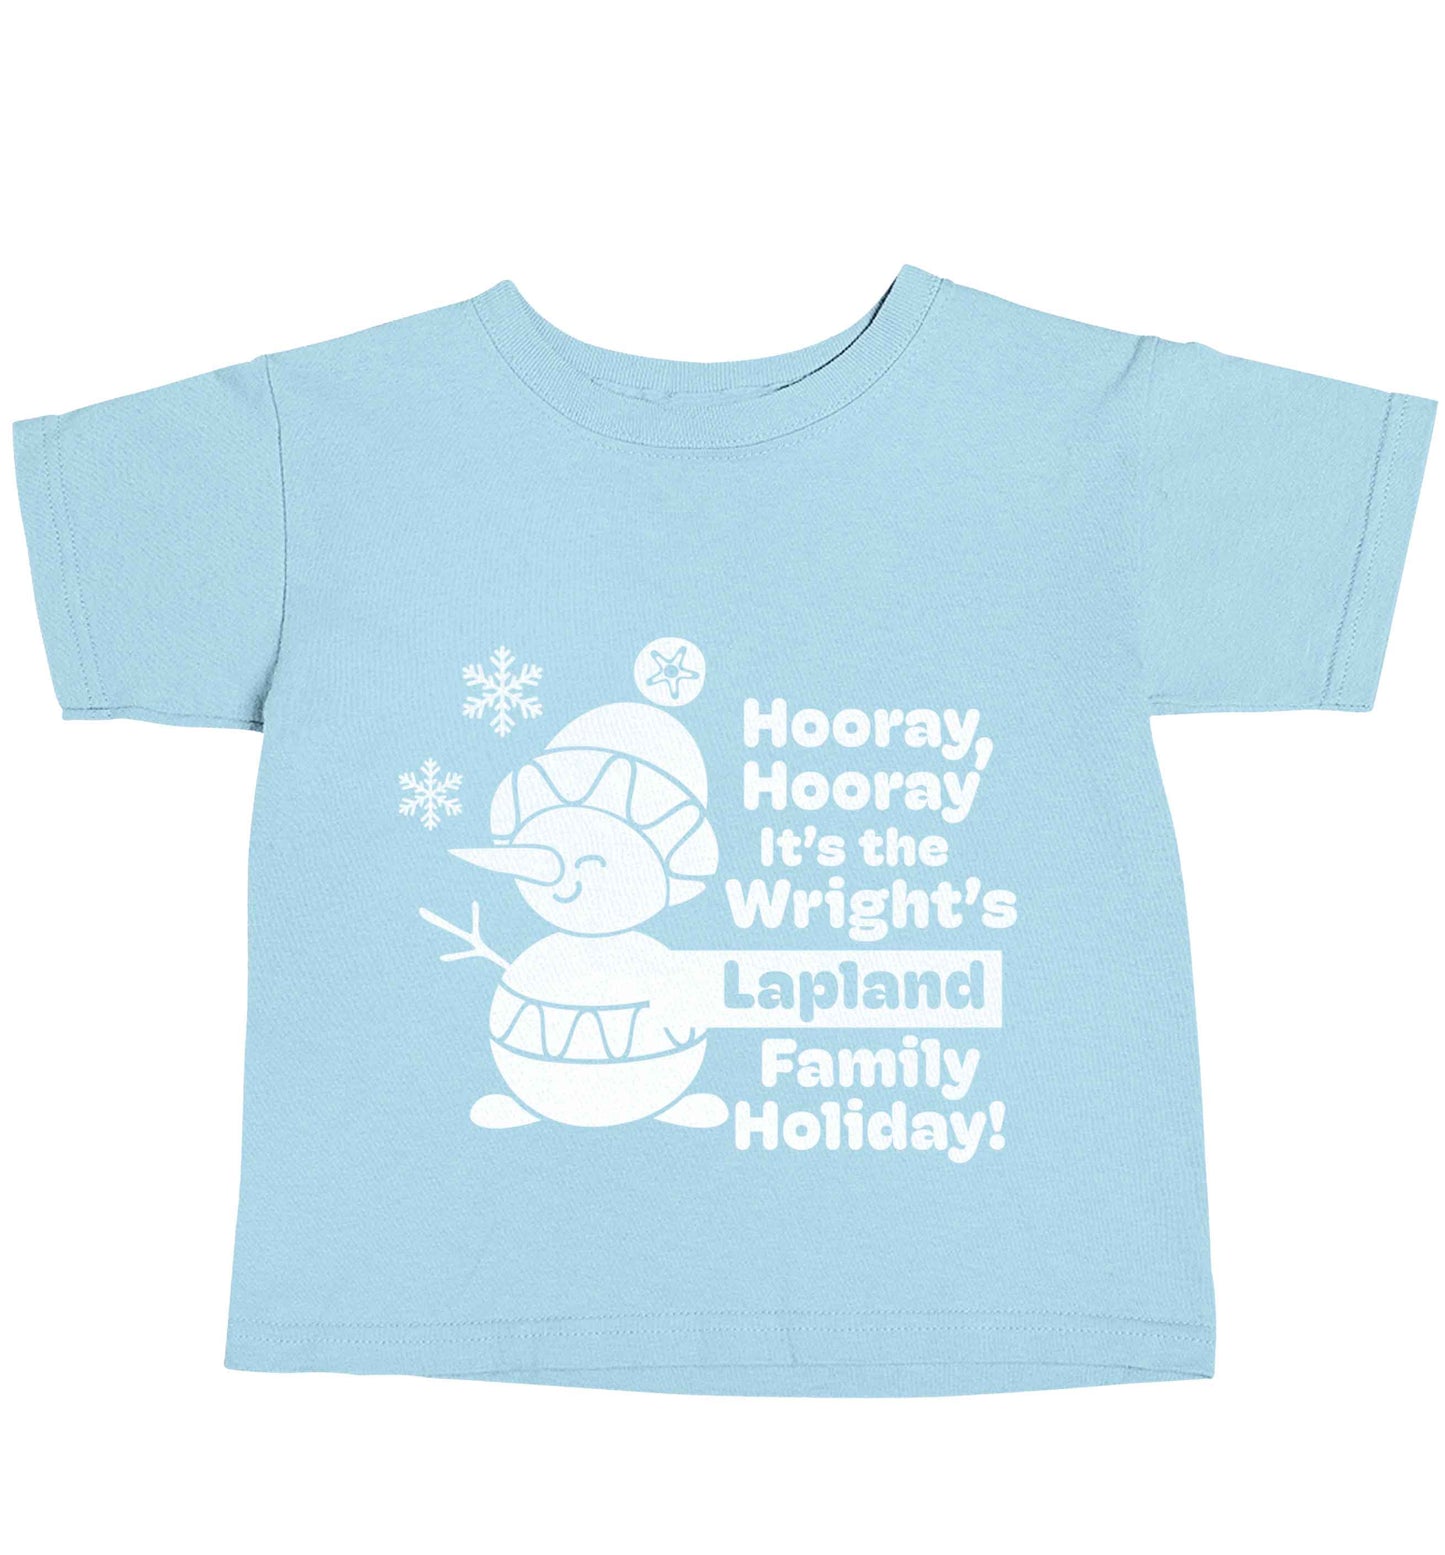 Hooray it's the personalised Lapland holiday! light blue baby toddler Tshirt 2 Years